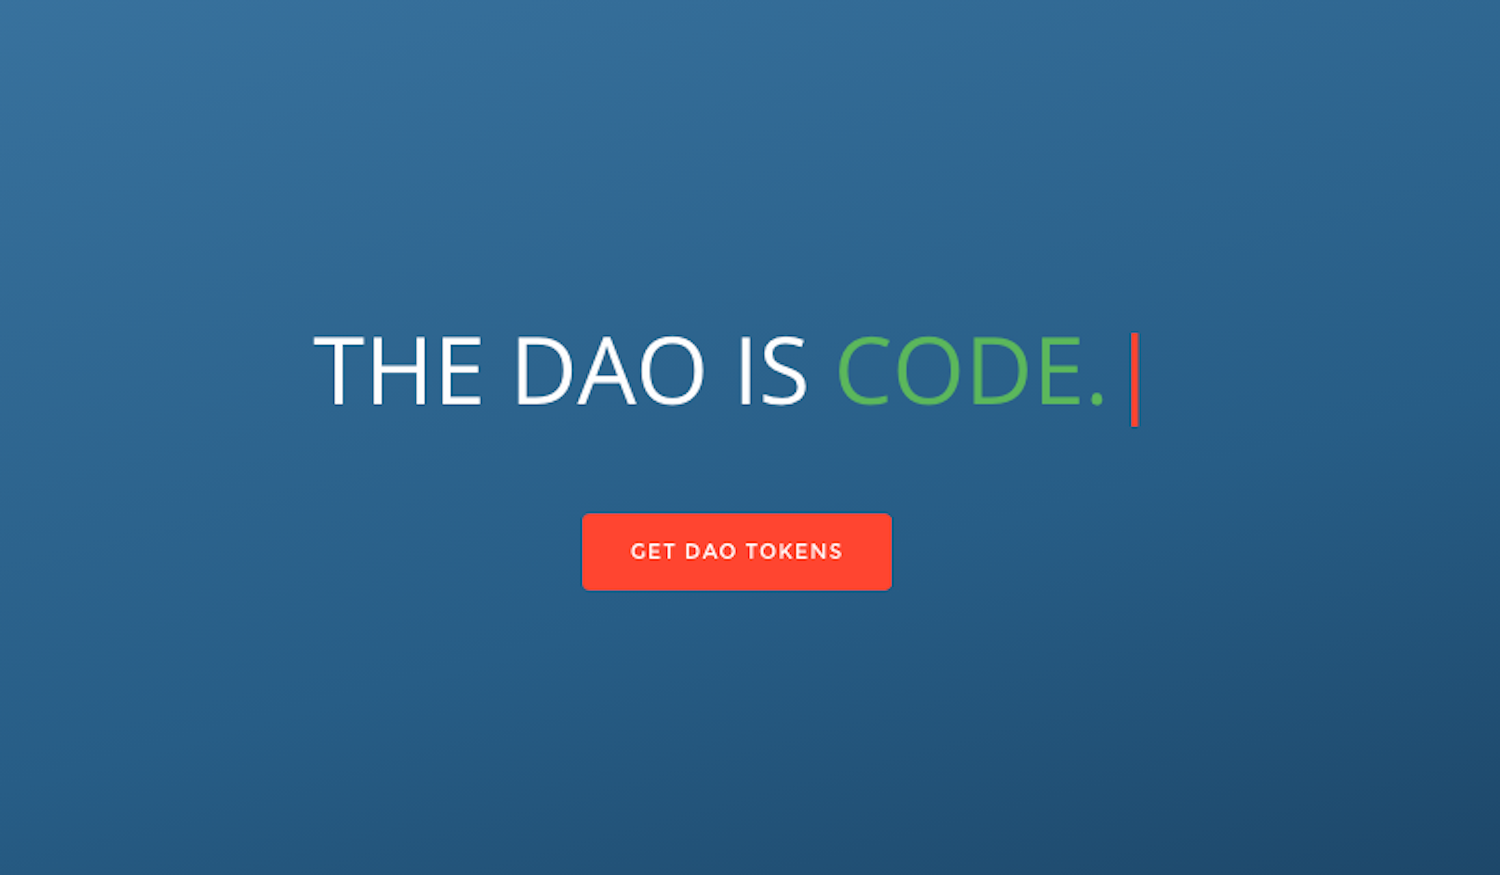 theDAO’s landing page